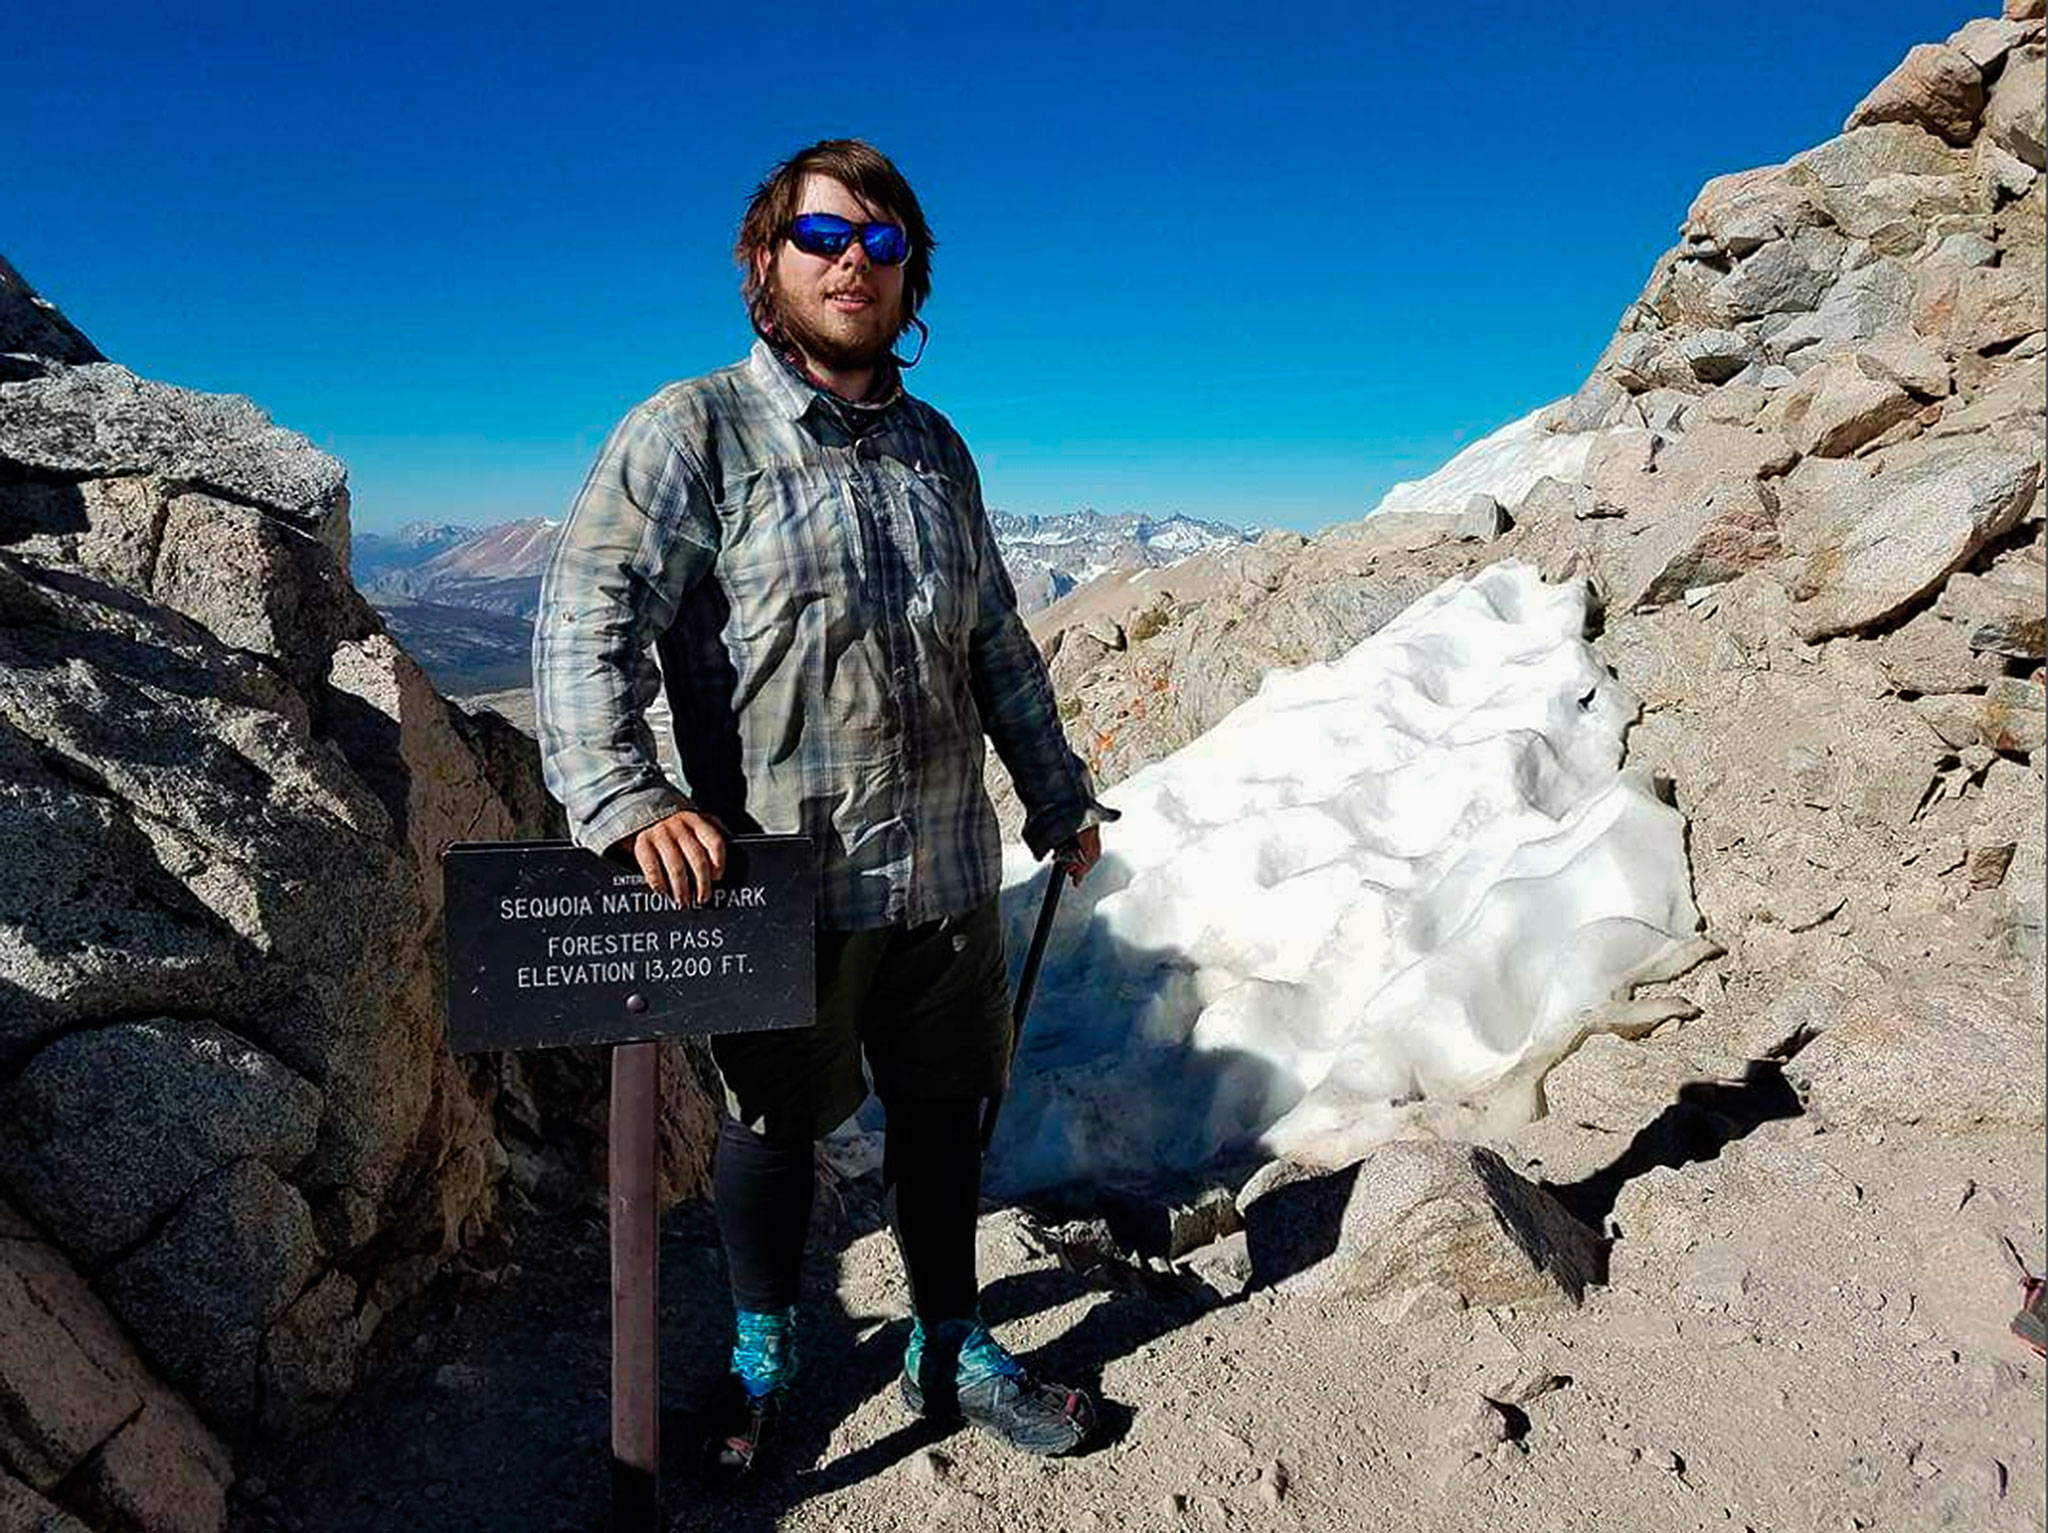 Devin Boyd at Forester Pass in Sequoia National Park. At 13,200 feet it is the highest point on the Pacific Crest Trail. (Photo Devin Boyd)